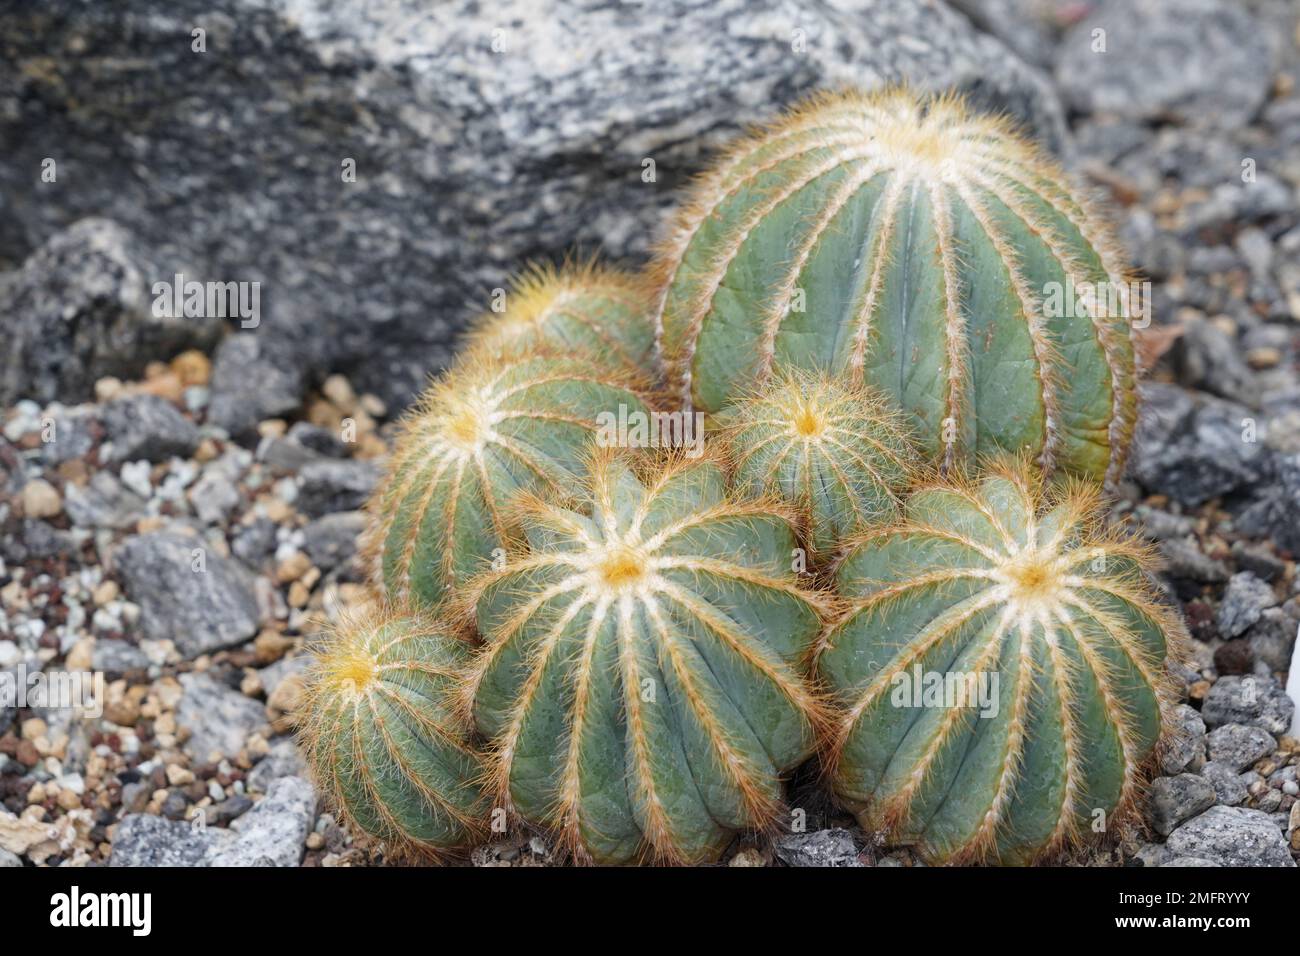 Ball cactus called in Latin parodia magnifica.  is a species of flowering plant in the family Cactaceae, native to Brazil. Stock Photo